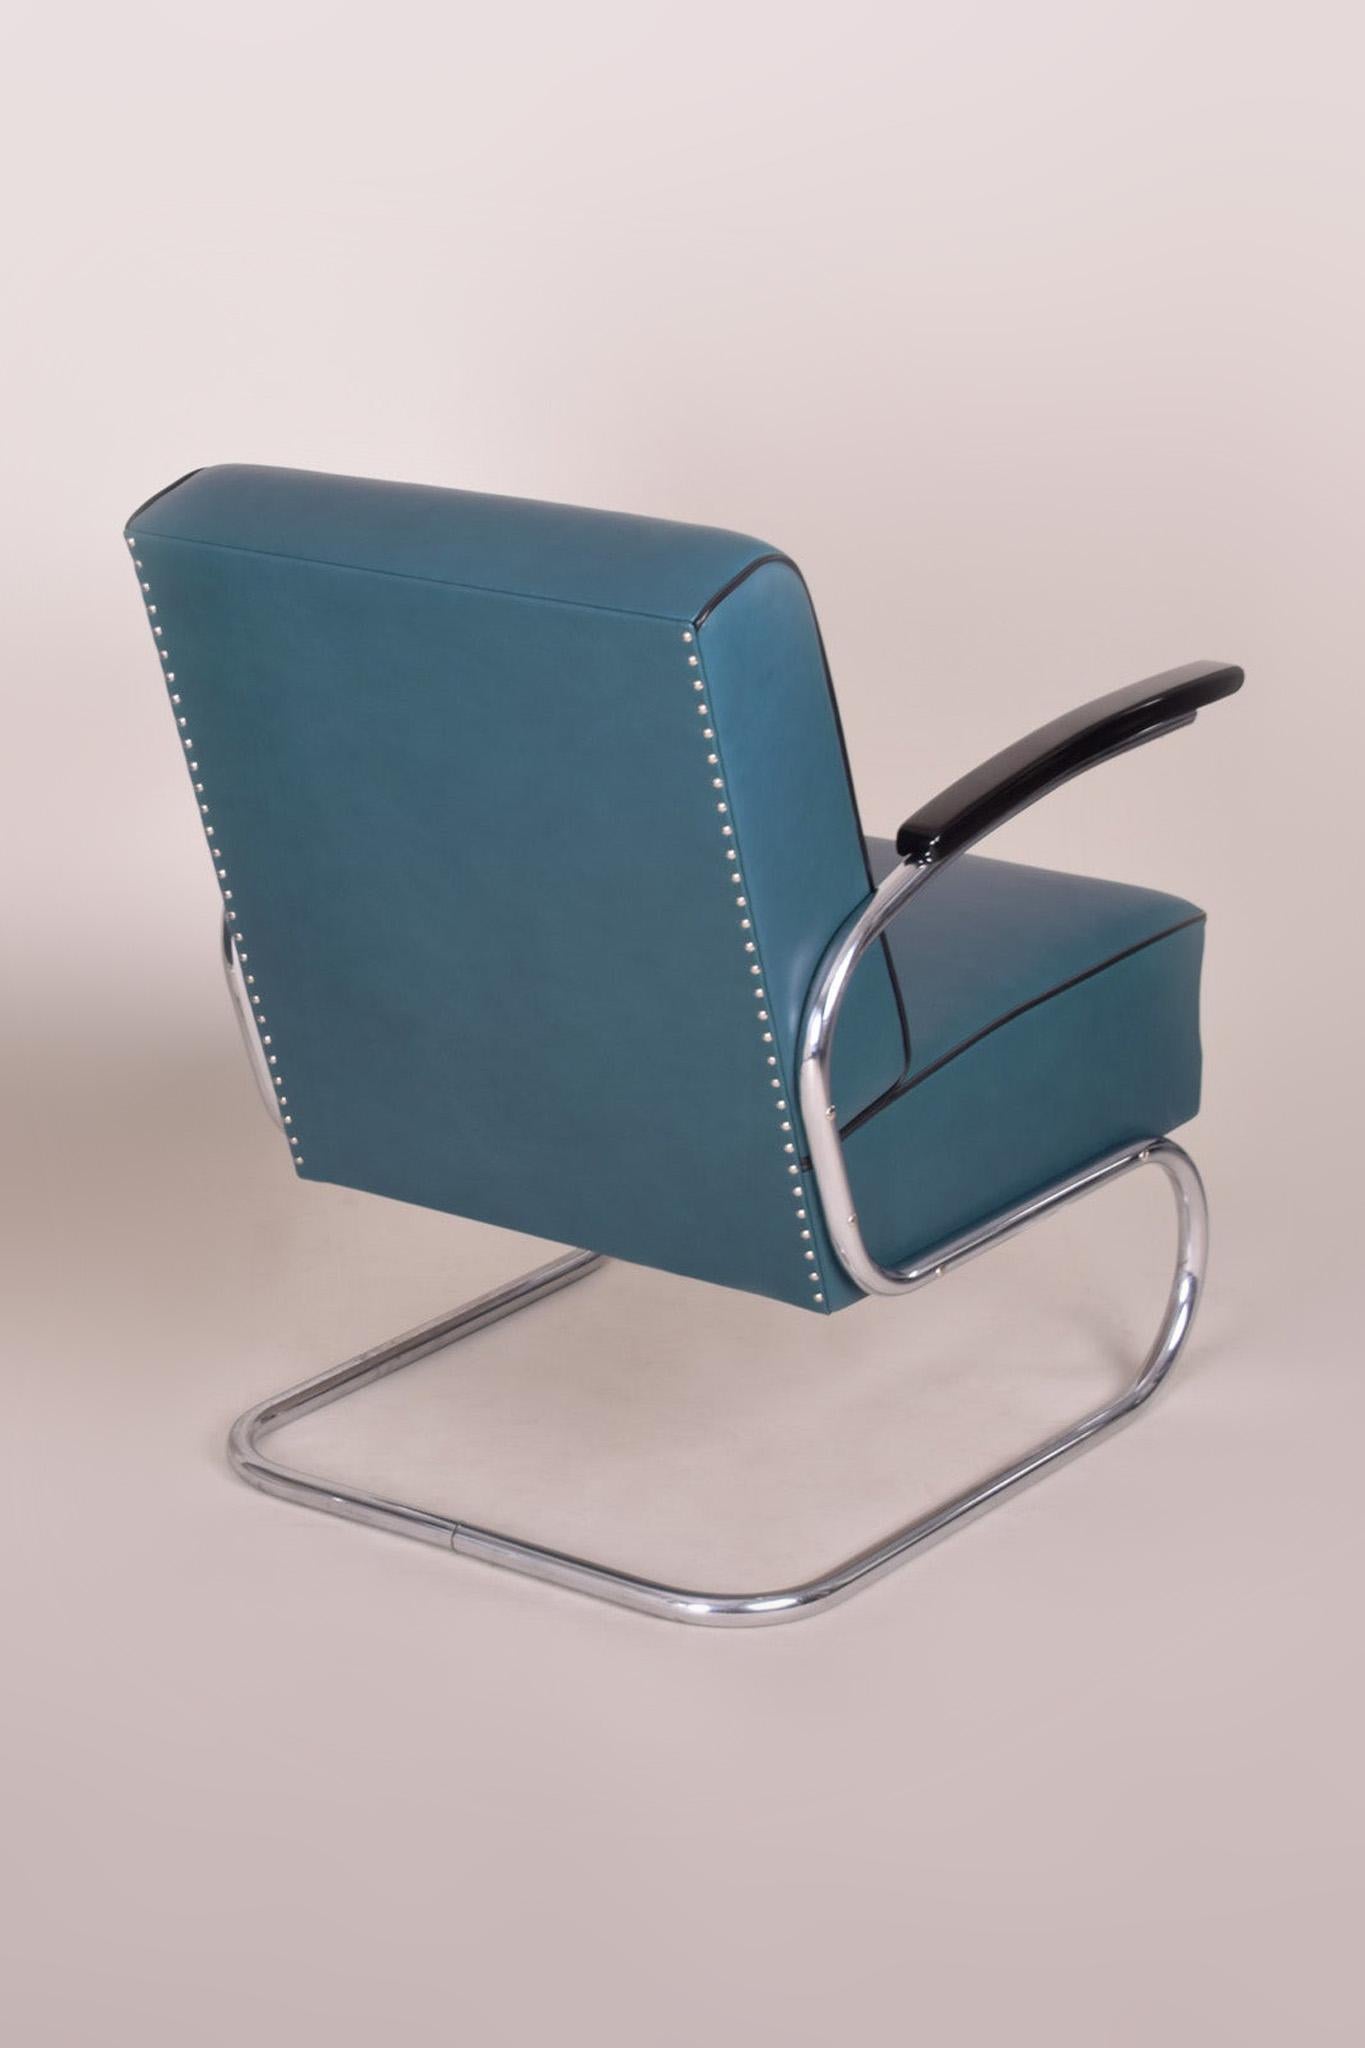 Tubular Steel Cantilever Armchair in Art Deco, Chrome, New Blue Leather, 1930s In Good Condition For Sale In Horomerice, CZ